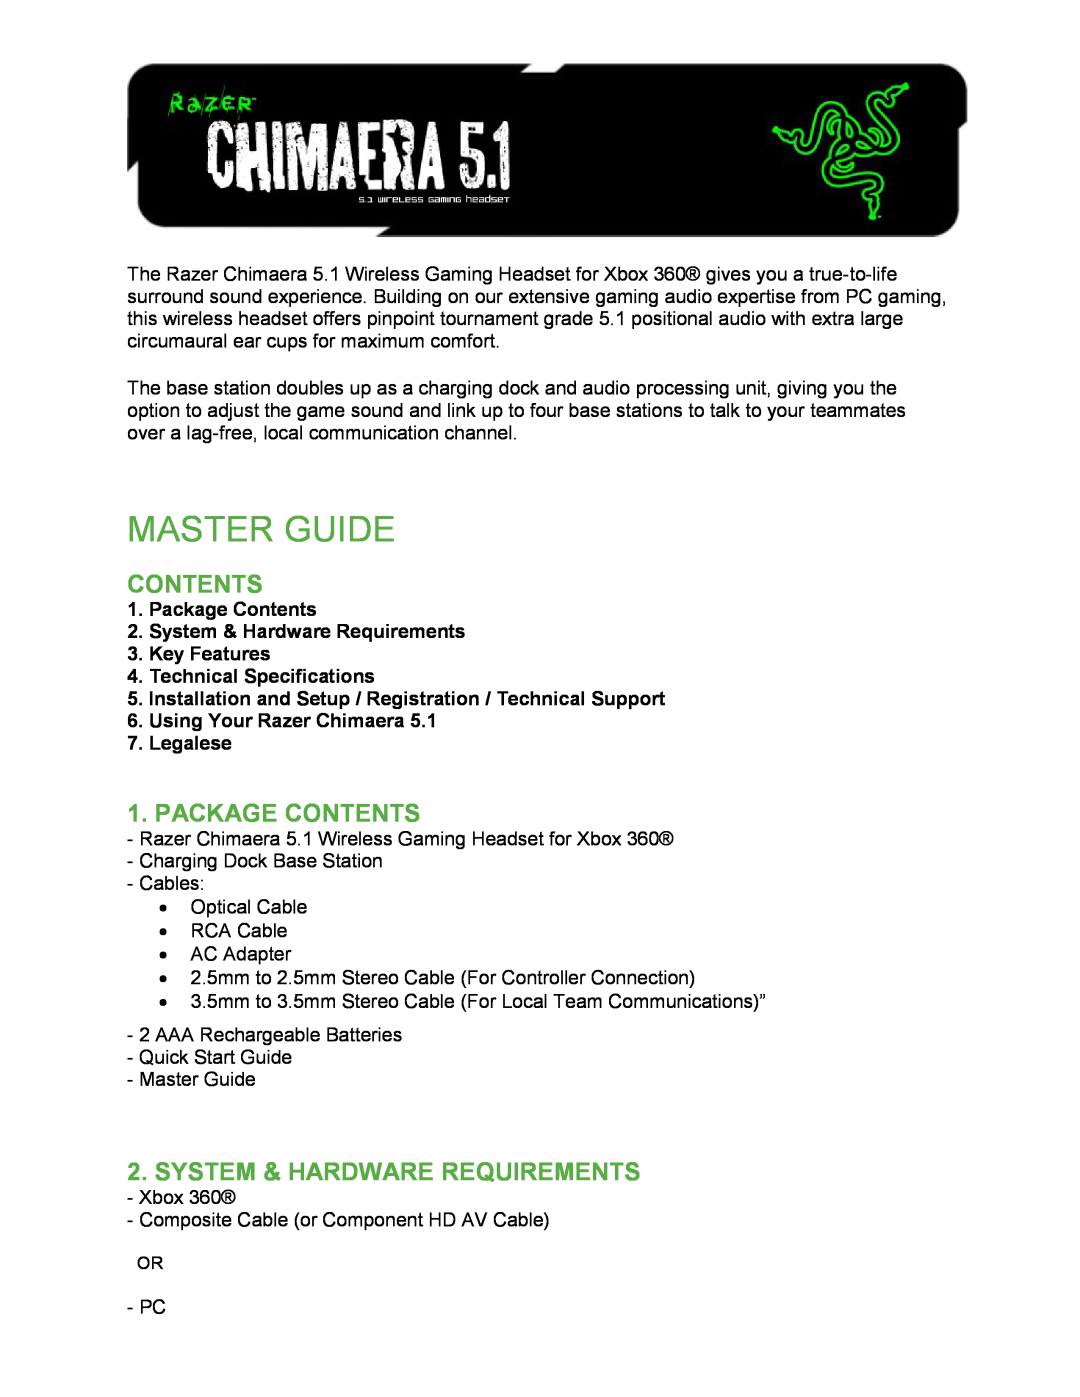 Razer 5.1 technical specifications Package Contents, System & Hardware Requirements, Technical Specifications 